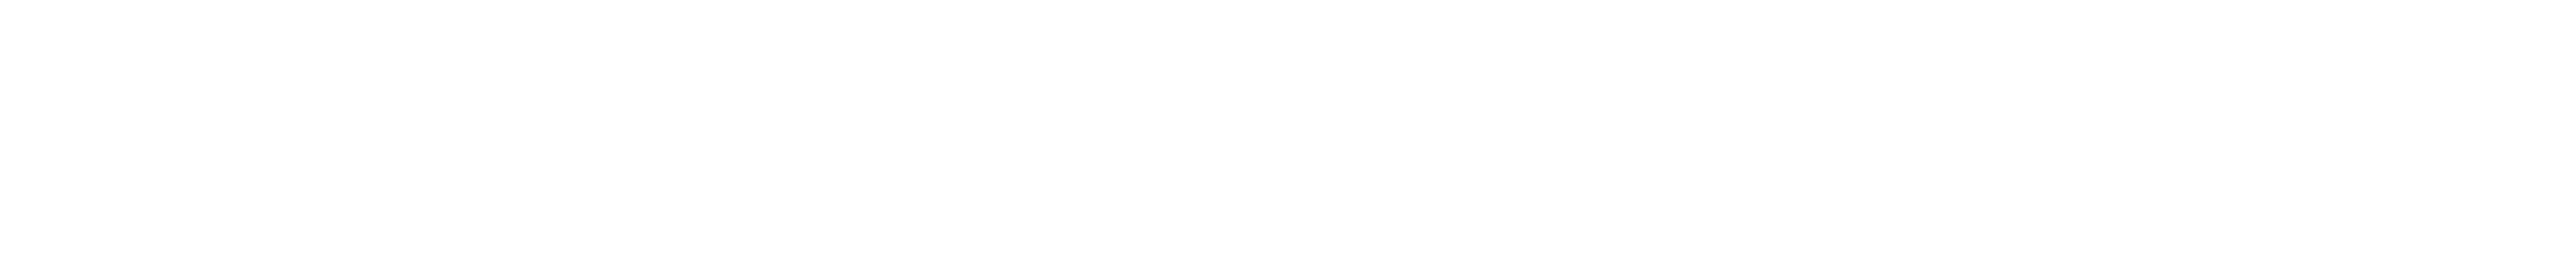 National AED Registry